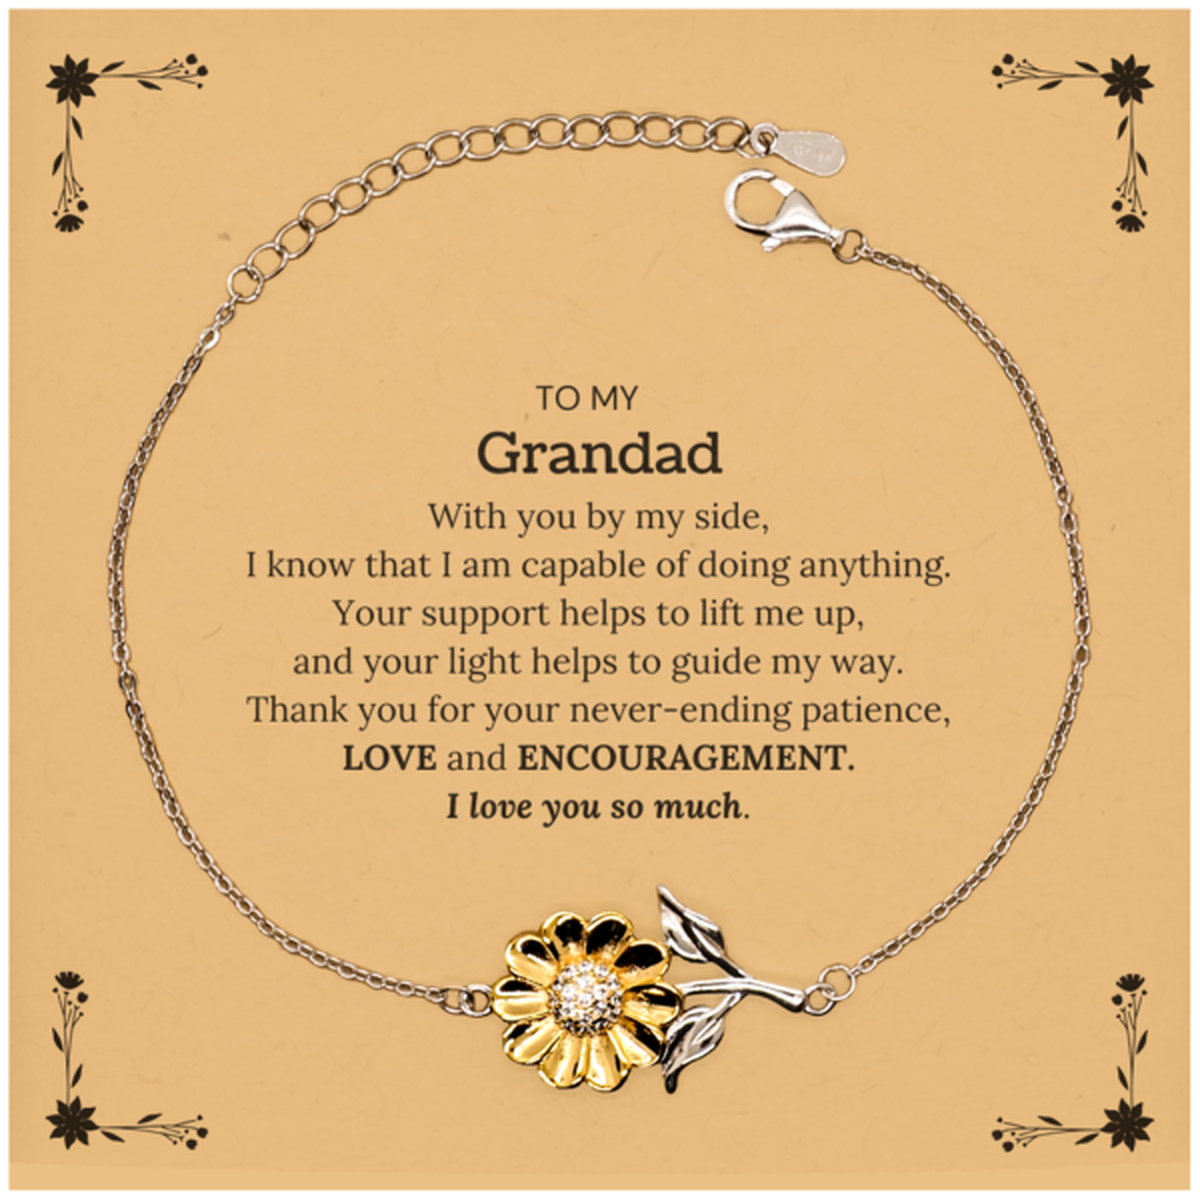 Appreciation Grandad Sunflower Bracelet Gifts, To My Grandad Birthday Christmas Wedding Keepsake Gifts for Grandad With you by my side, I know that I am capable of doing anything. I love you so much